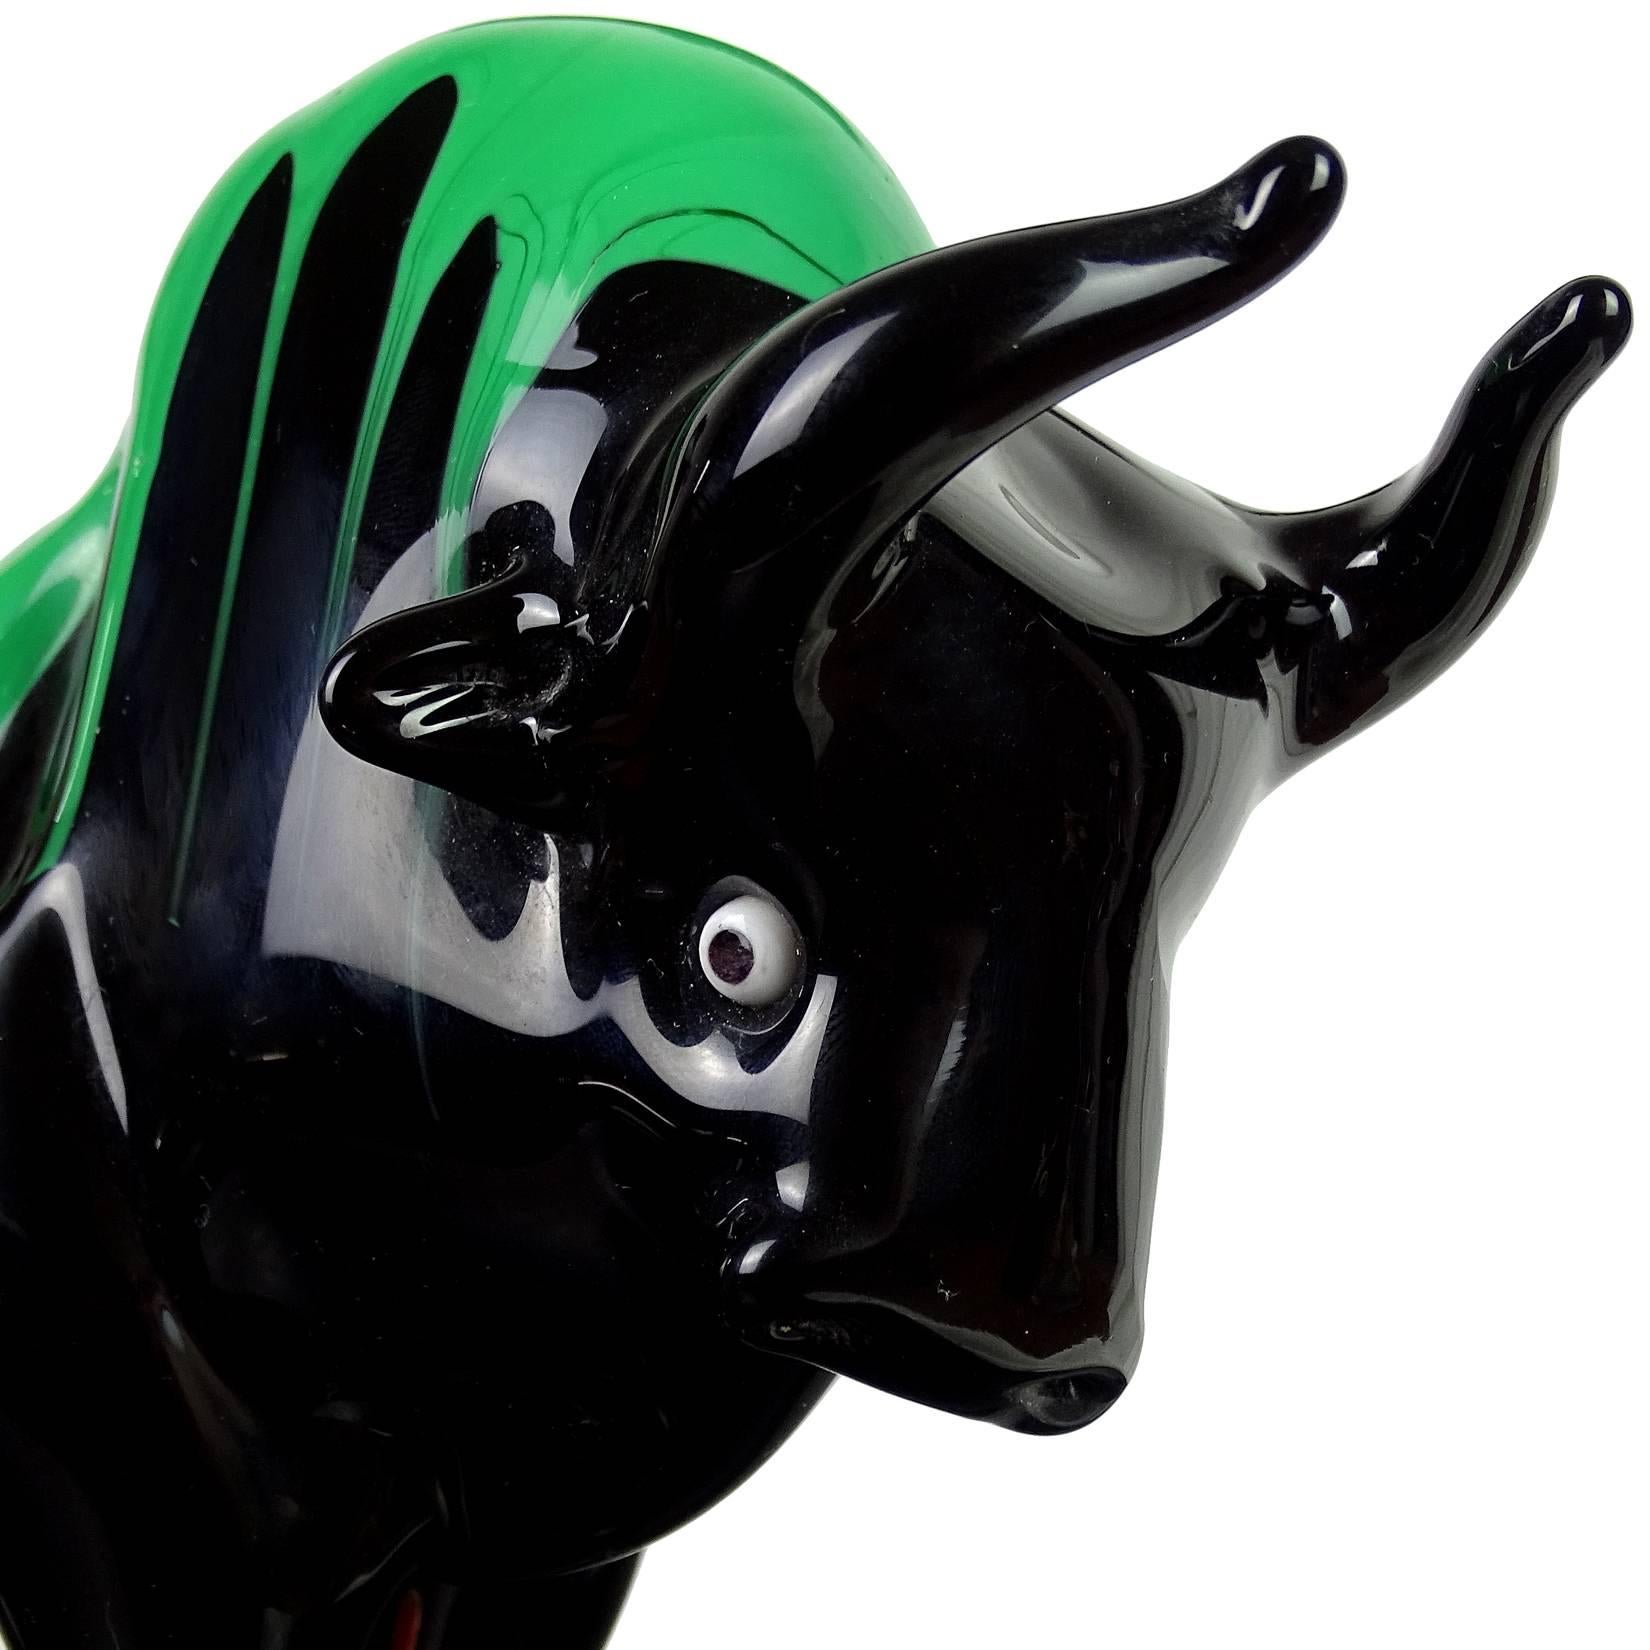 Beautiful large Murano hand blown, jet black with green drips Italian art glass Taurus bull sculpture. Has a red Murano label on the base. Measures 10